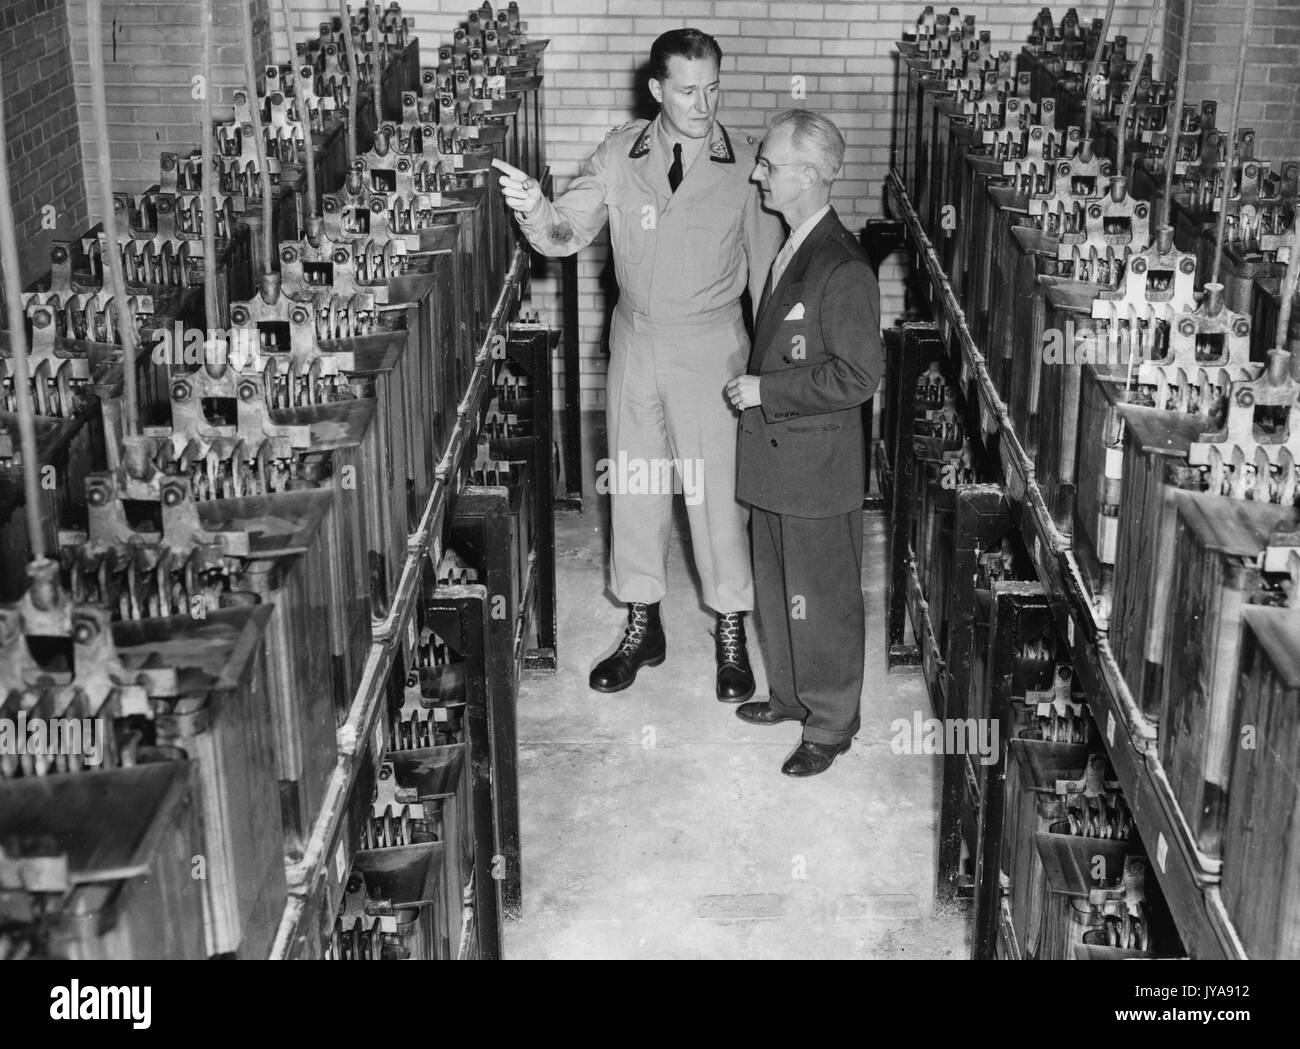 American television host Lynn Poole and guest on set of the Johns Hopkins Science review television program, inspecting industrial electric switching equipment, 1951. Stock Photo